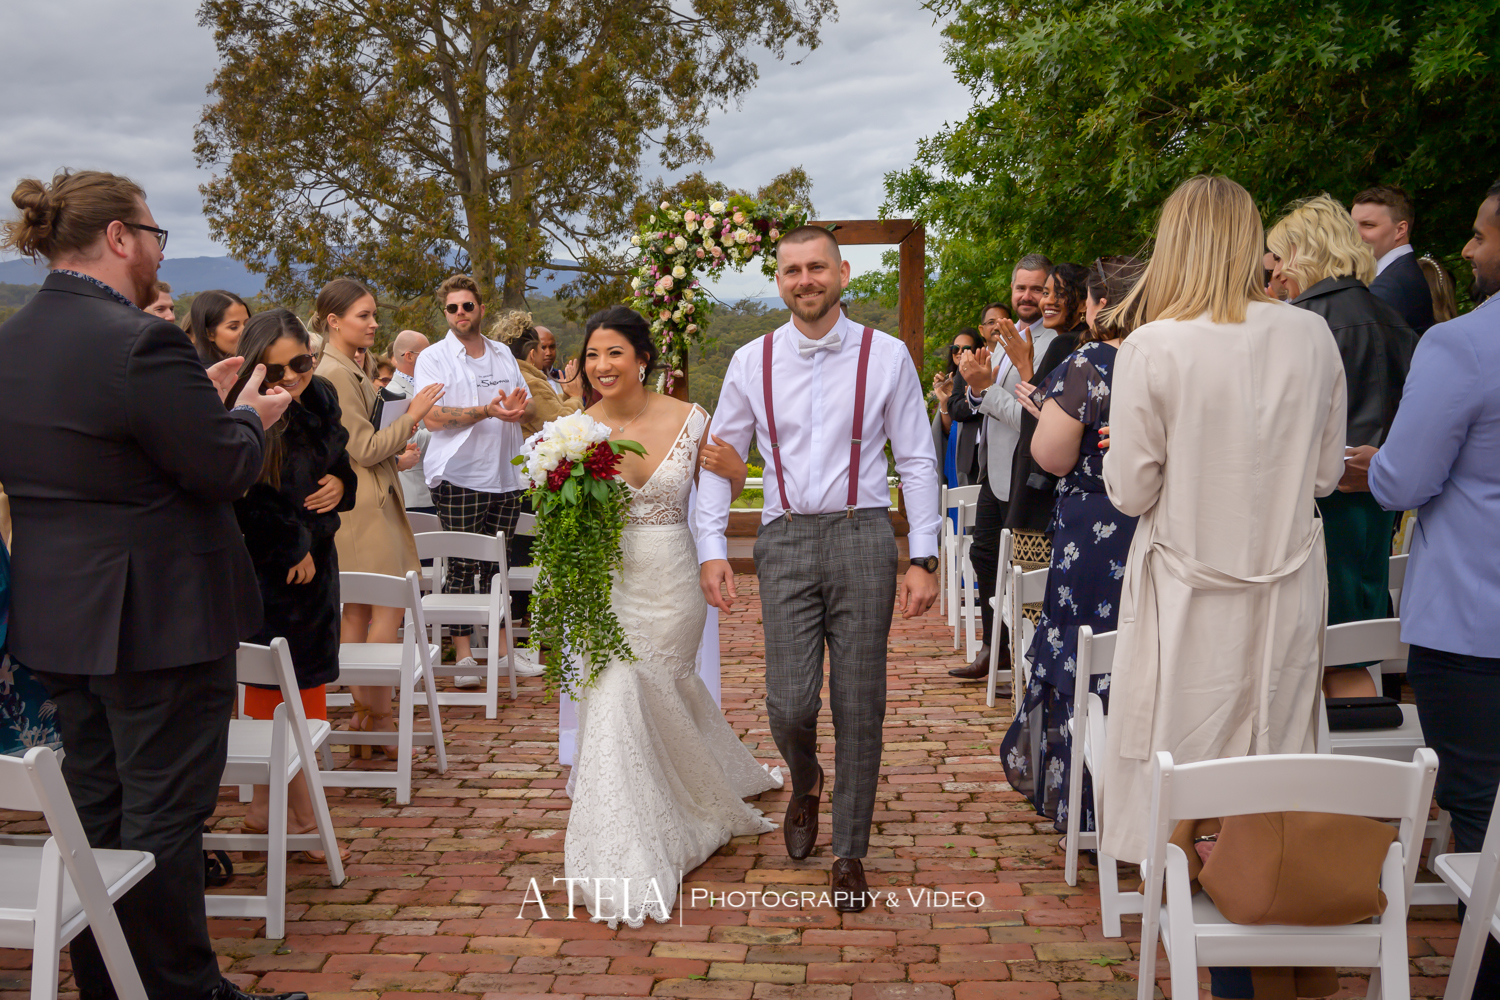 , Wandin Park Estate Wedding Photography Melbourne by ATEIA Photography &#038; Video